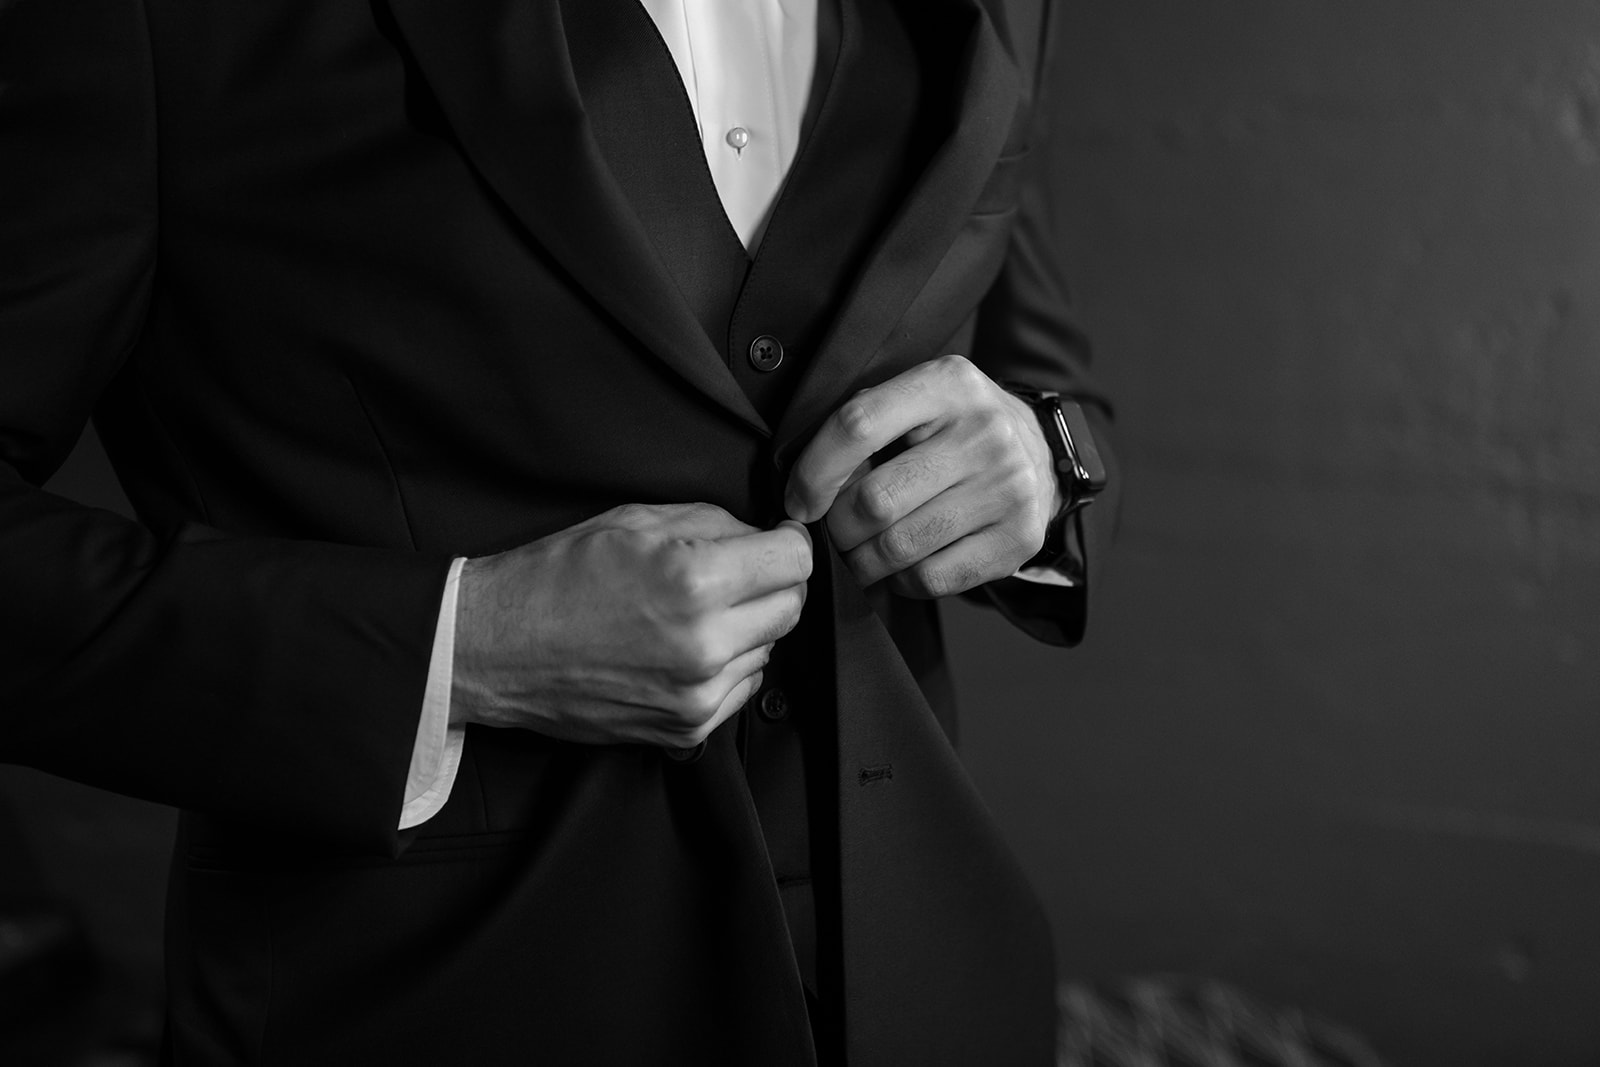 A close up of the groom's hands as he buttons up his jacket on his wedding day.